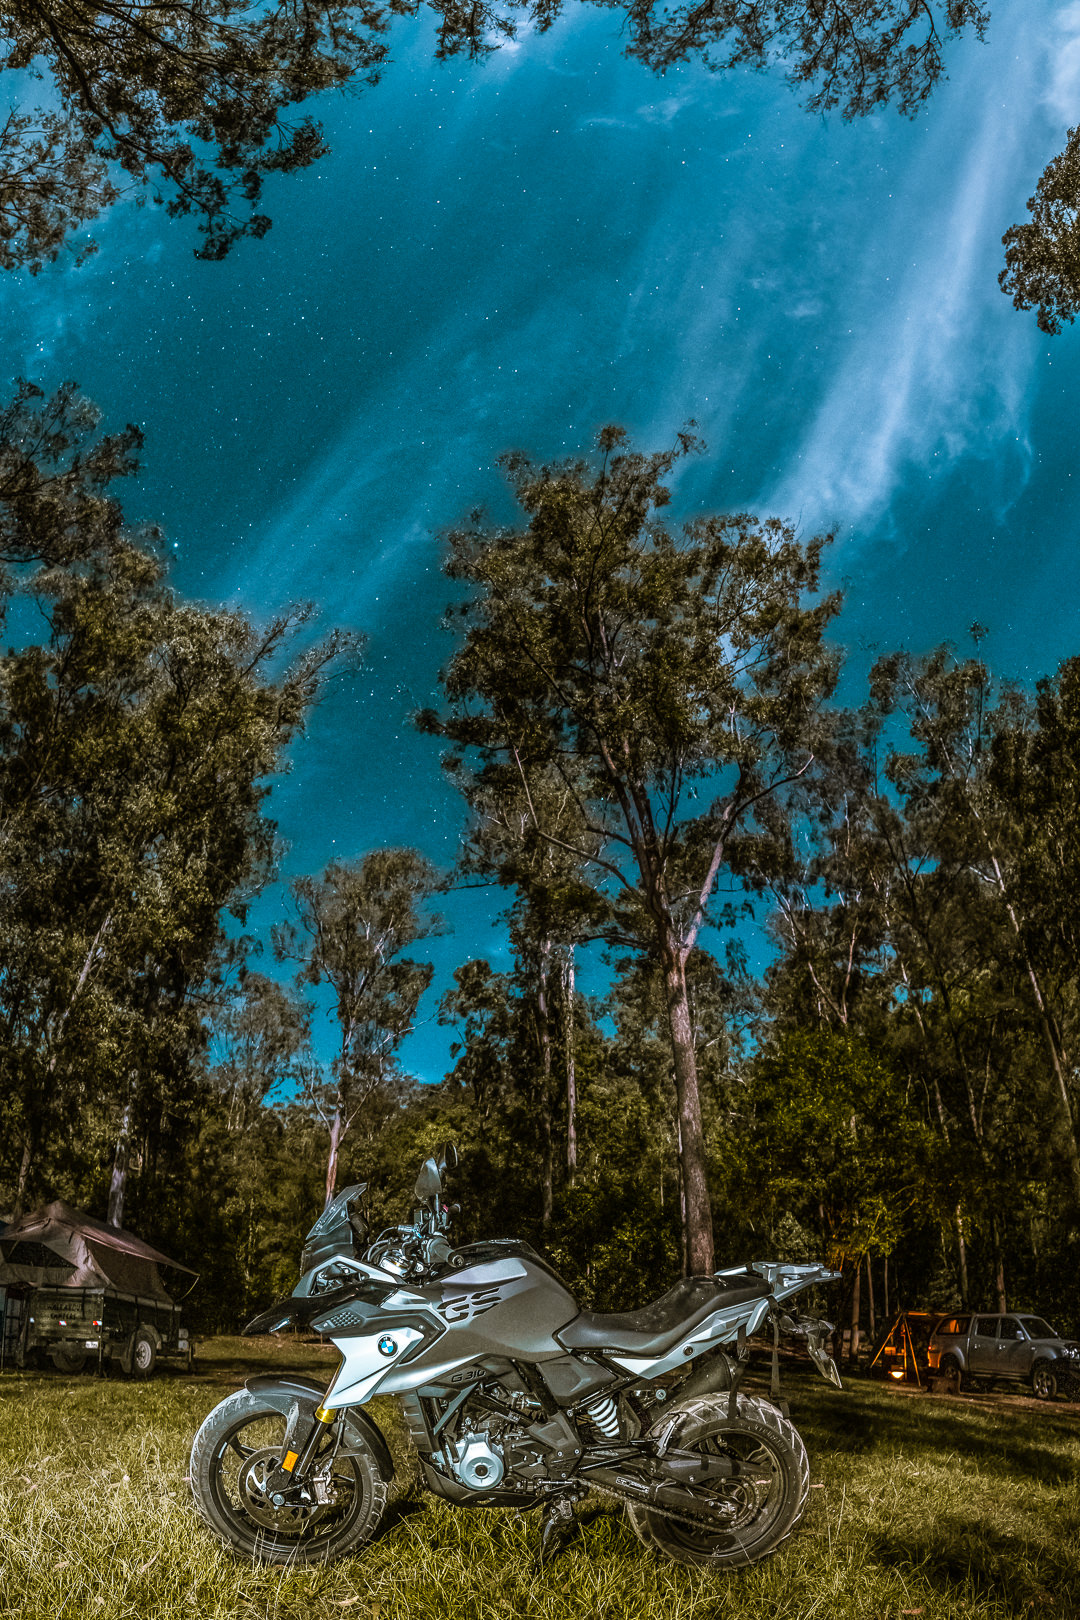 BMW G310GS photographed with a starry sky in the background. Photography by Joseph Byford while camping in Cononldale National Park